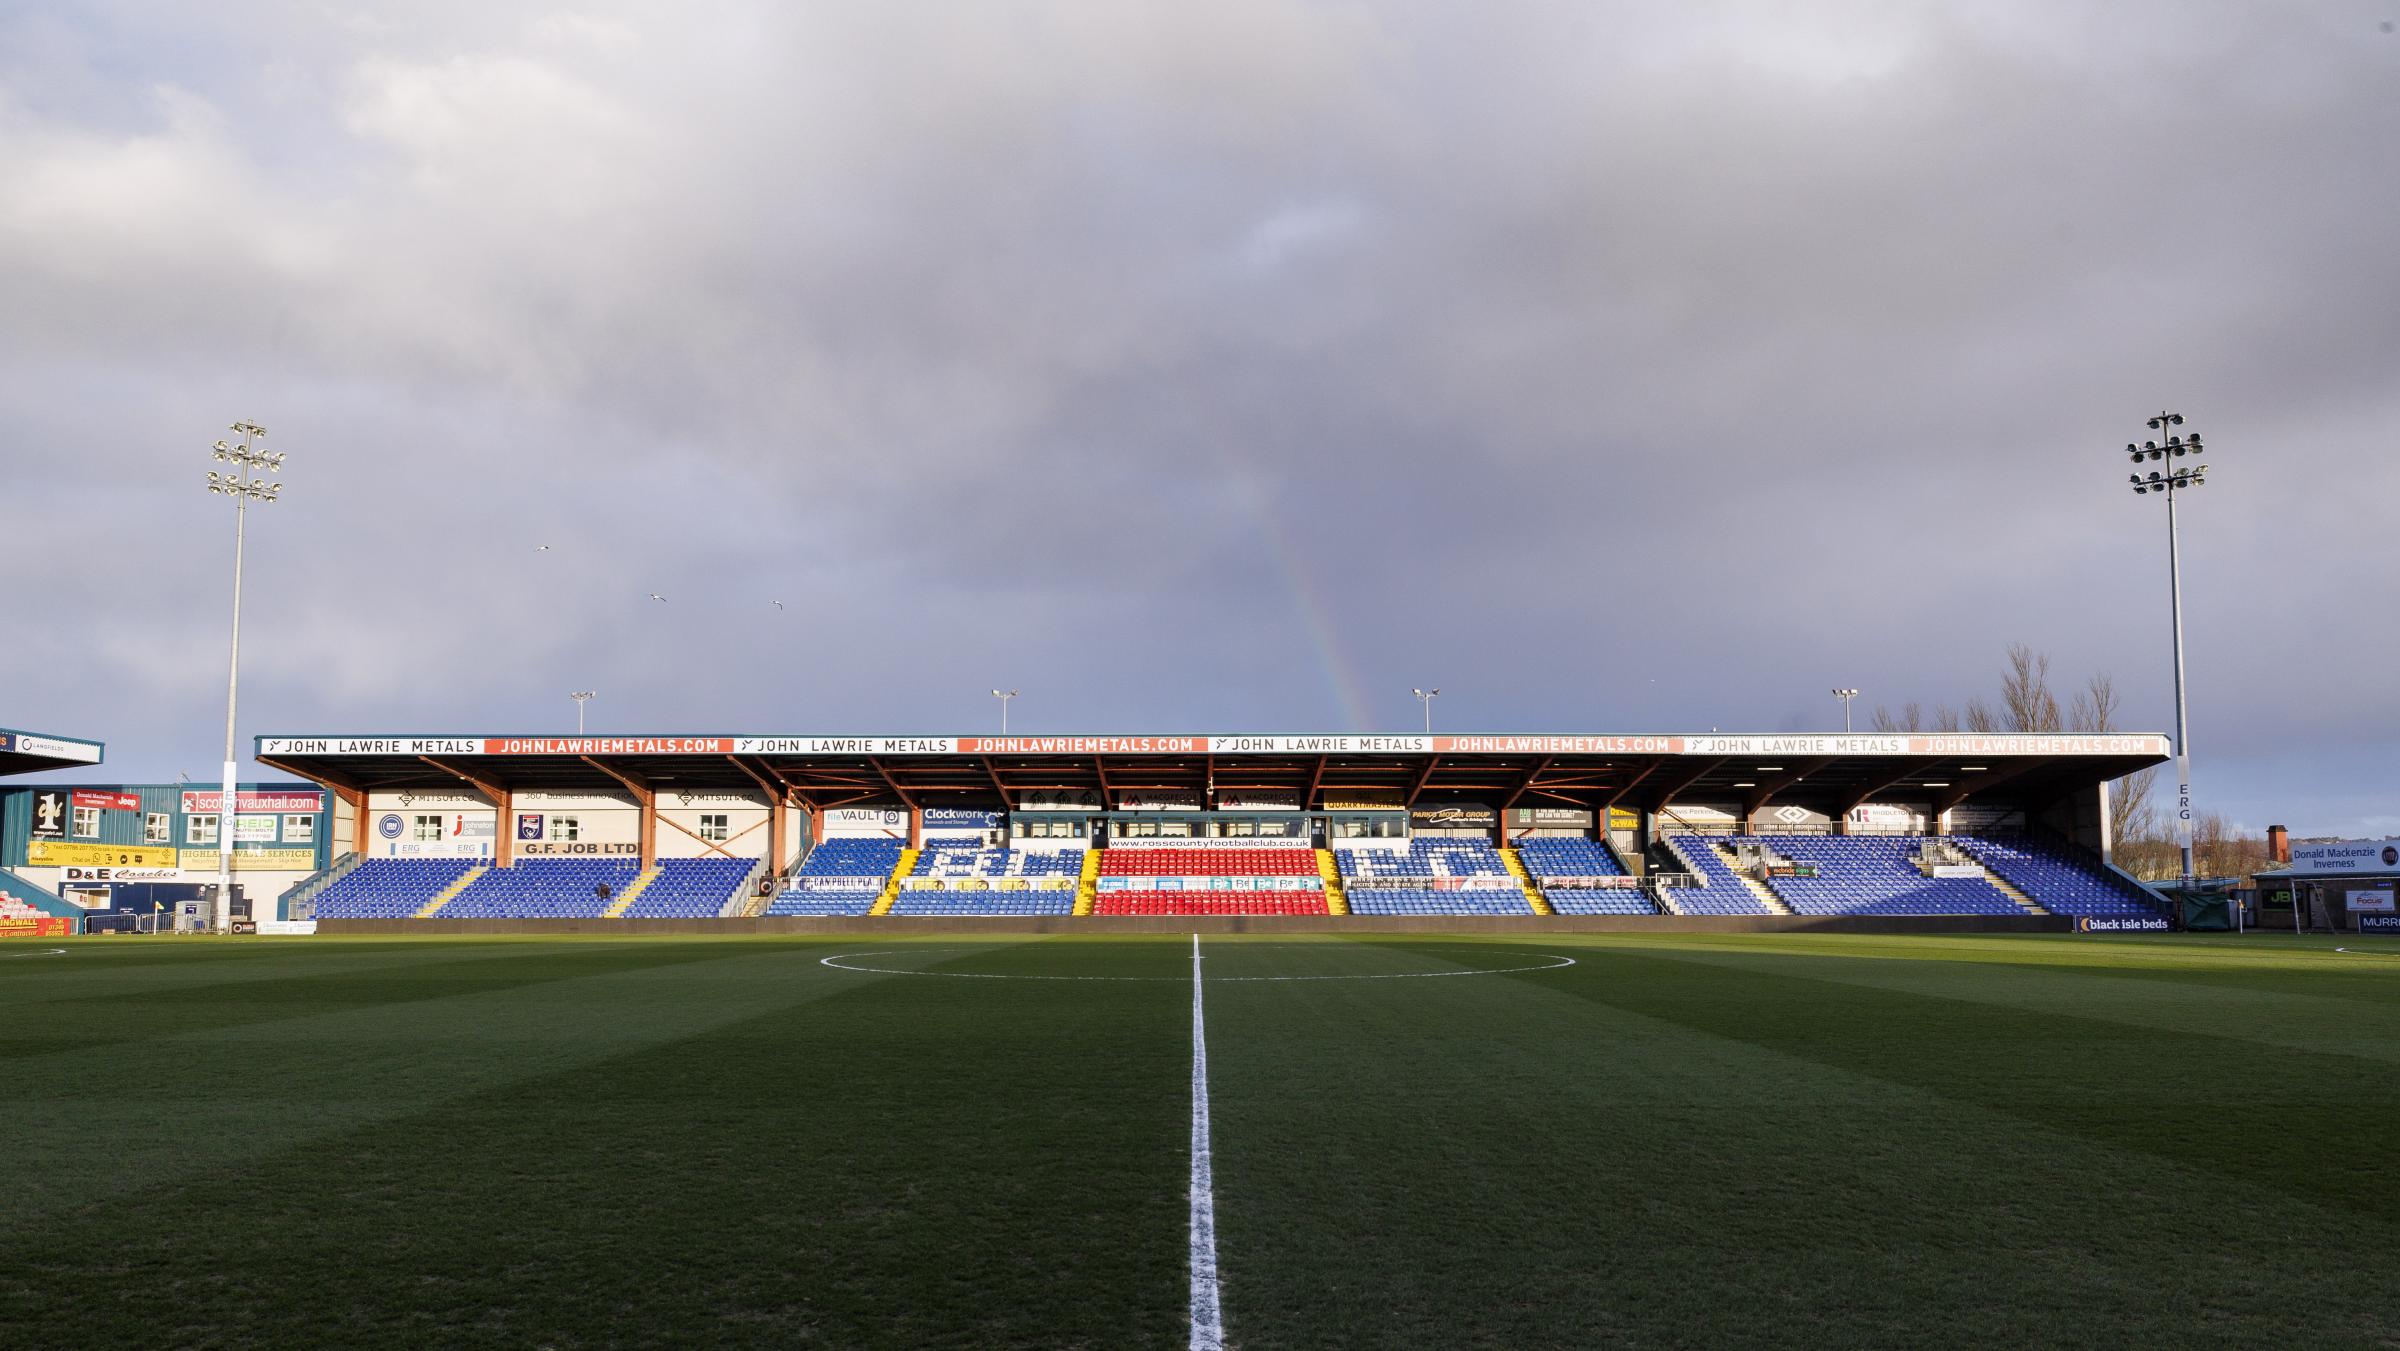 Man held after Dhanda 'racially abused' during County-Hibs